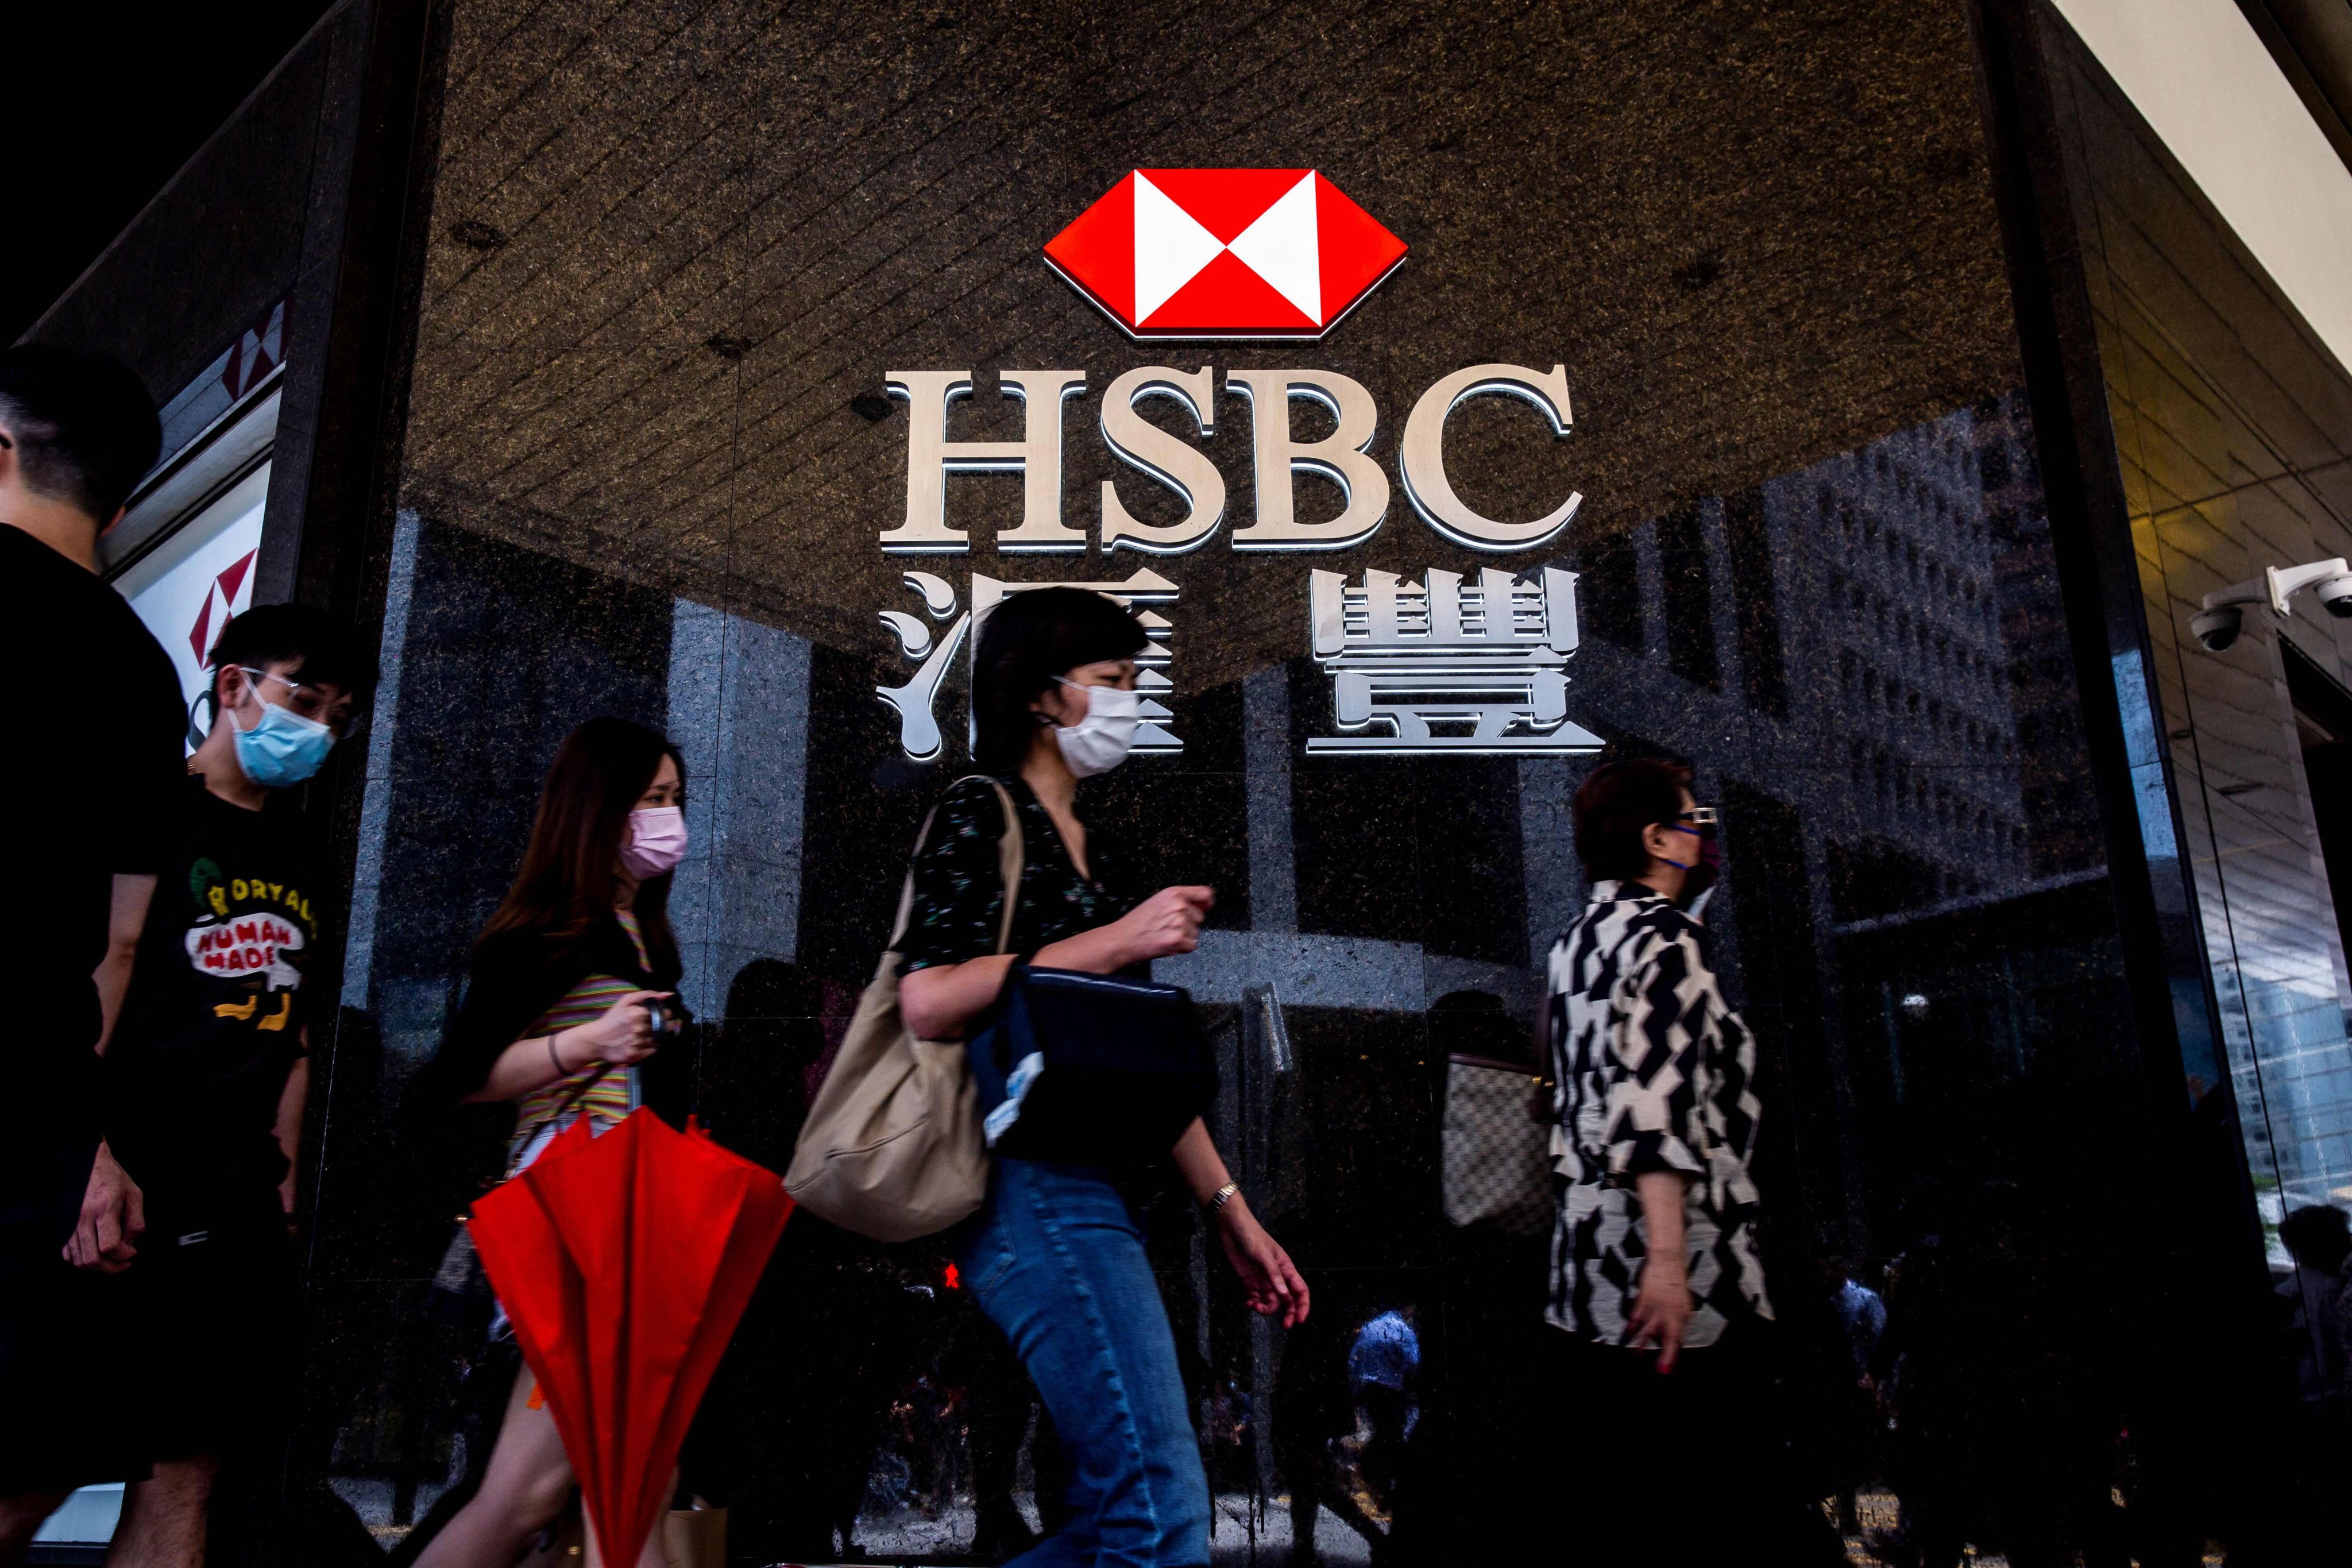 Pedestrians walk past the HSBC logo outside a bank branch in Hong Kong in August 2021. Photo: AFP